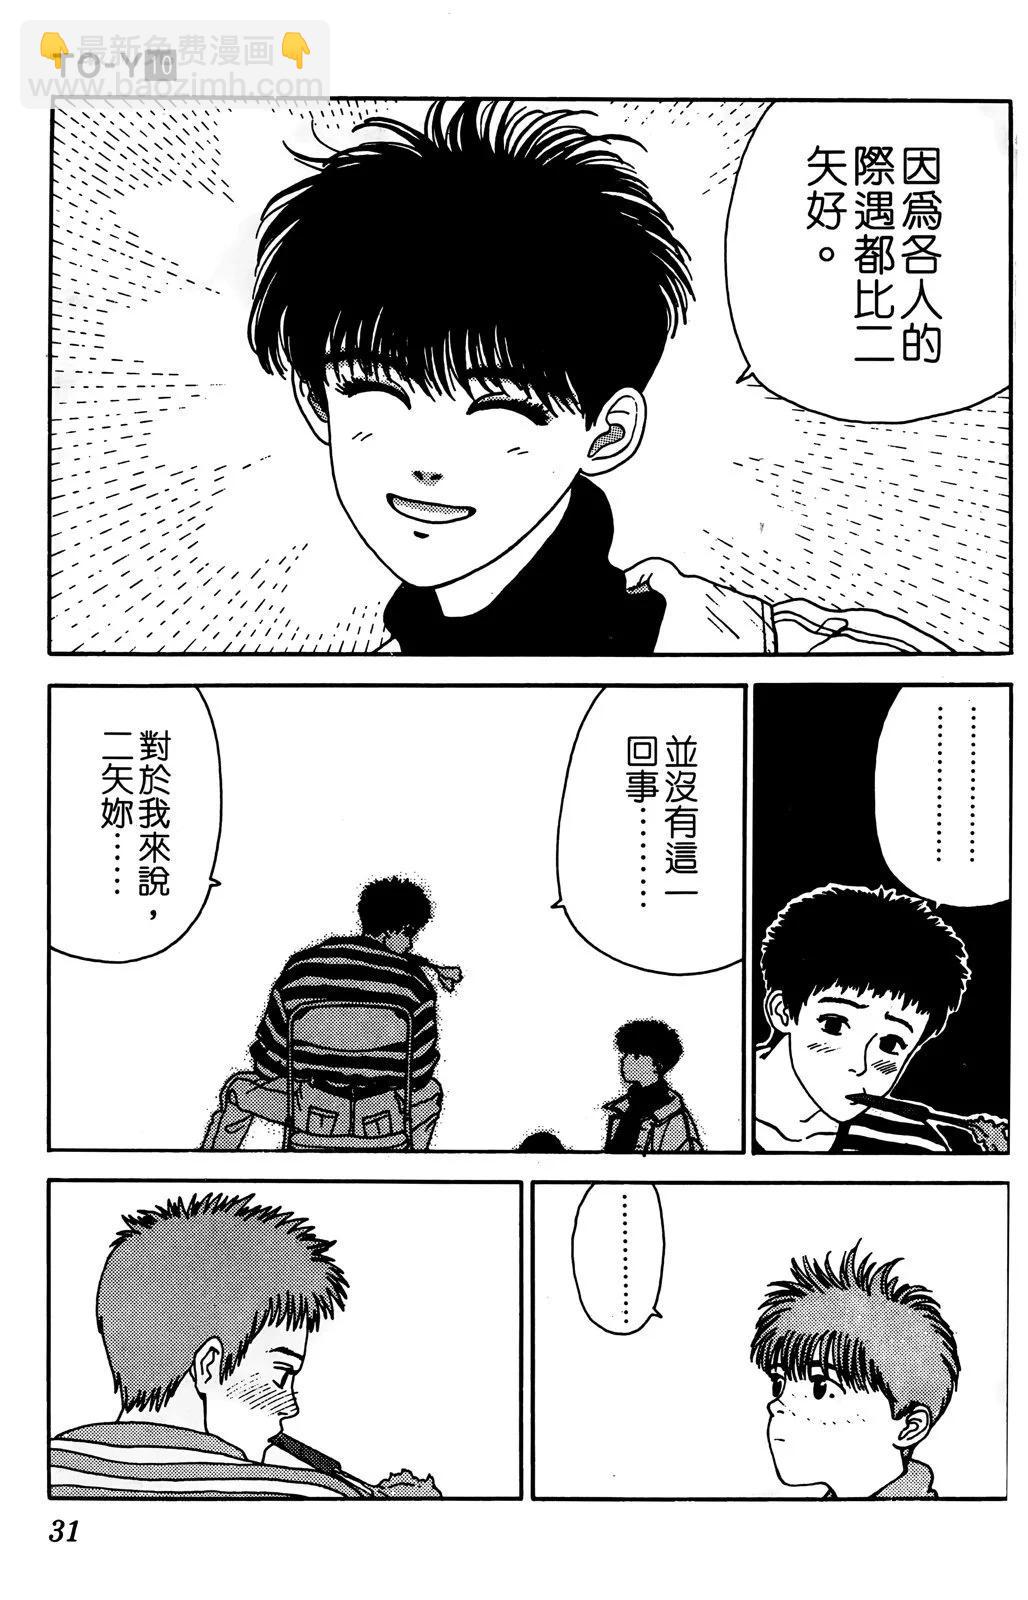 TO-Y - 第10卷(1/4) - 7